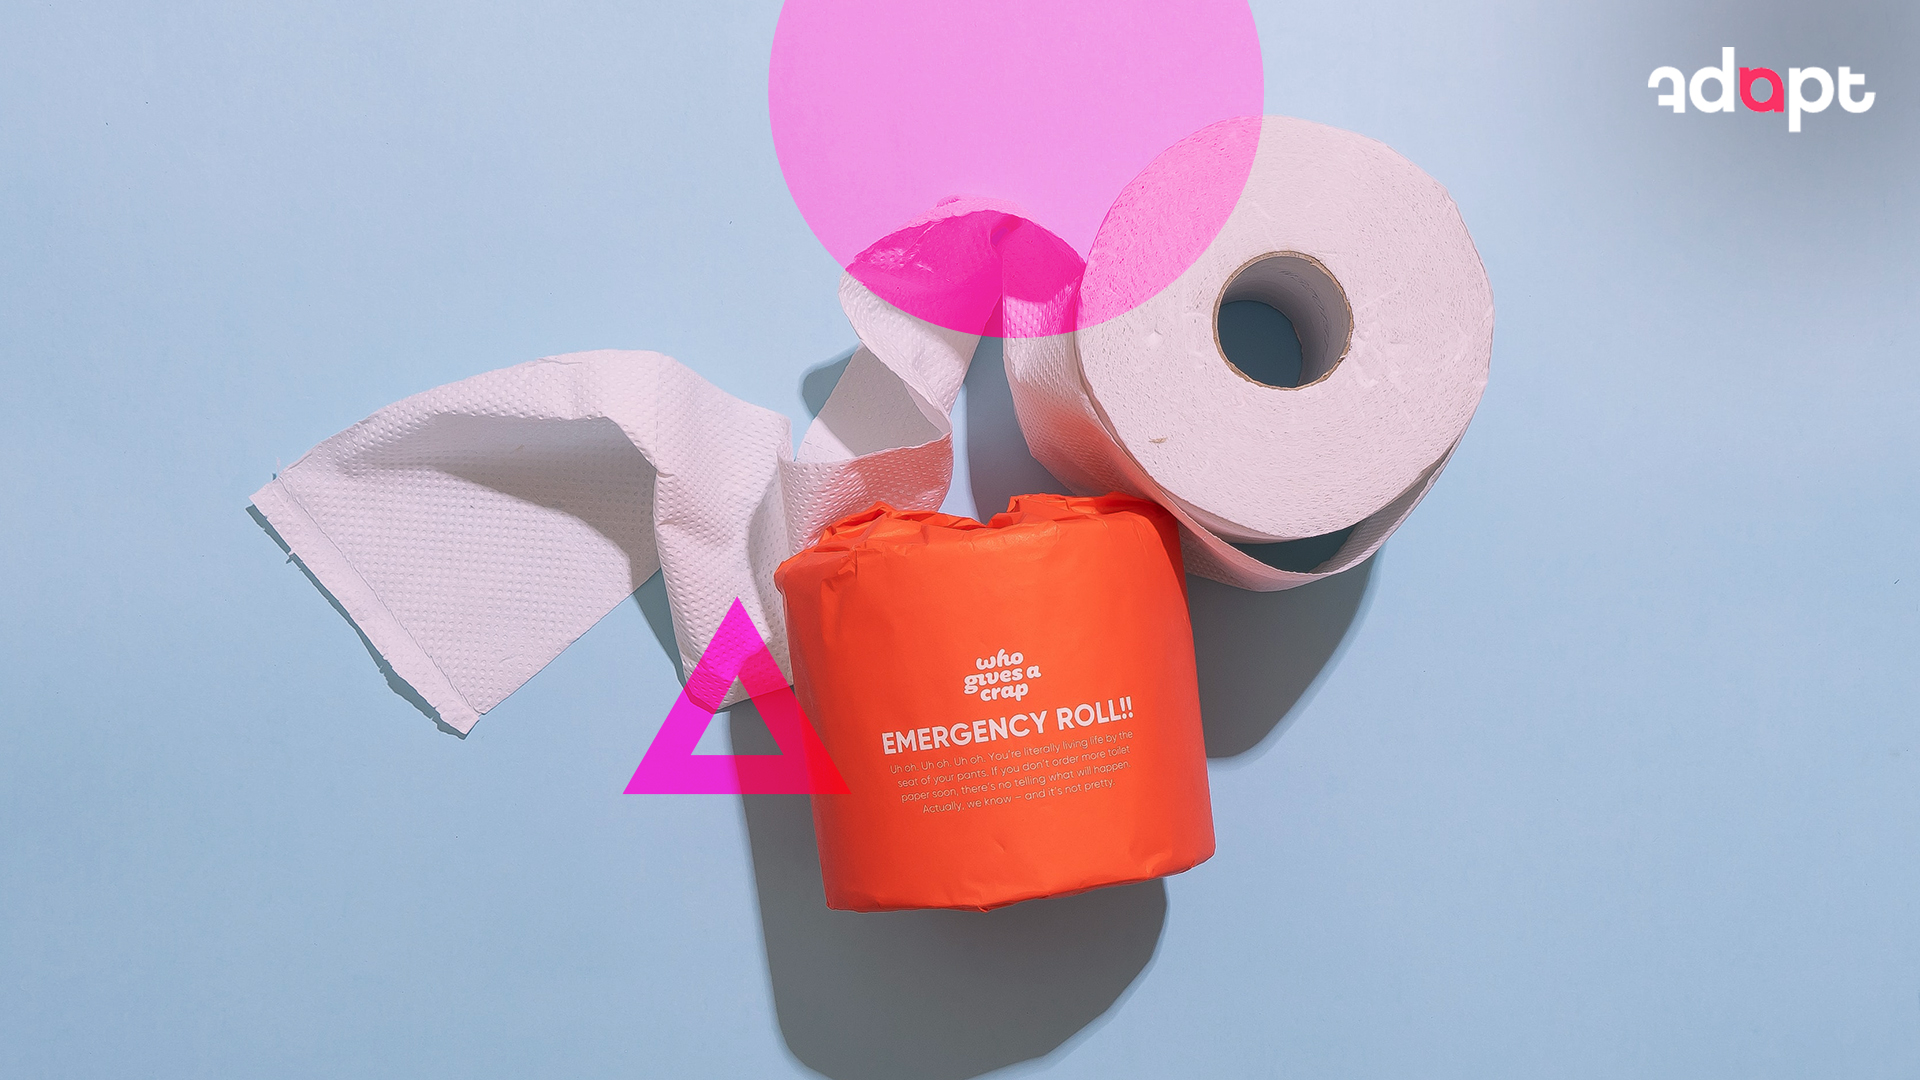 Brand strategy in a crisis blog with photo of emergency toilet paper